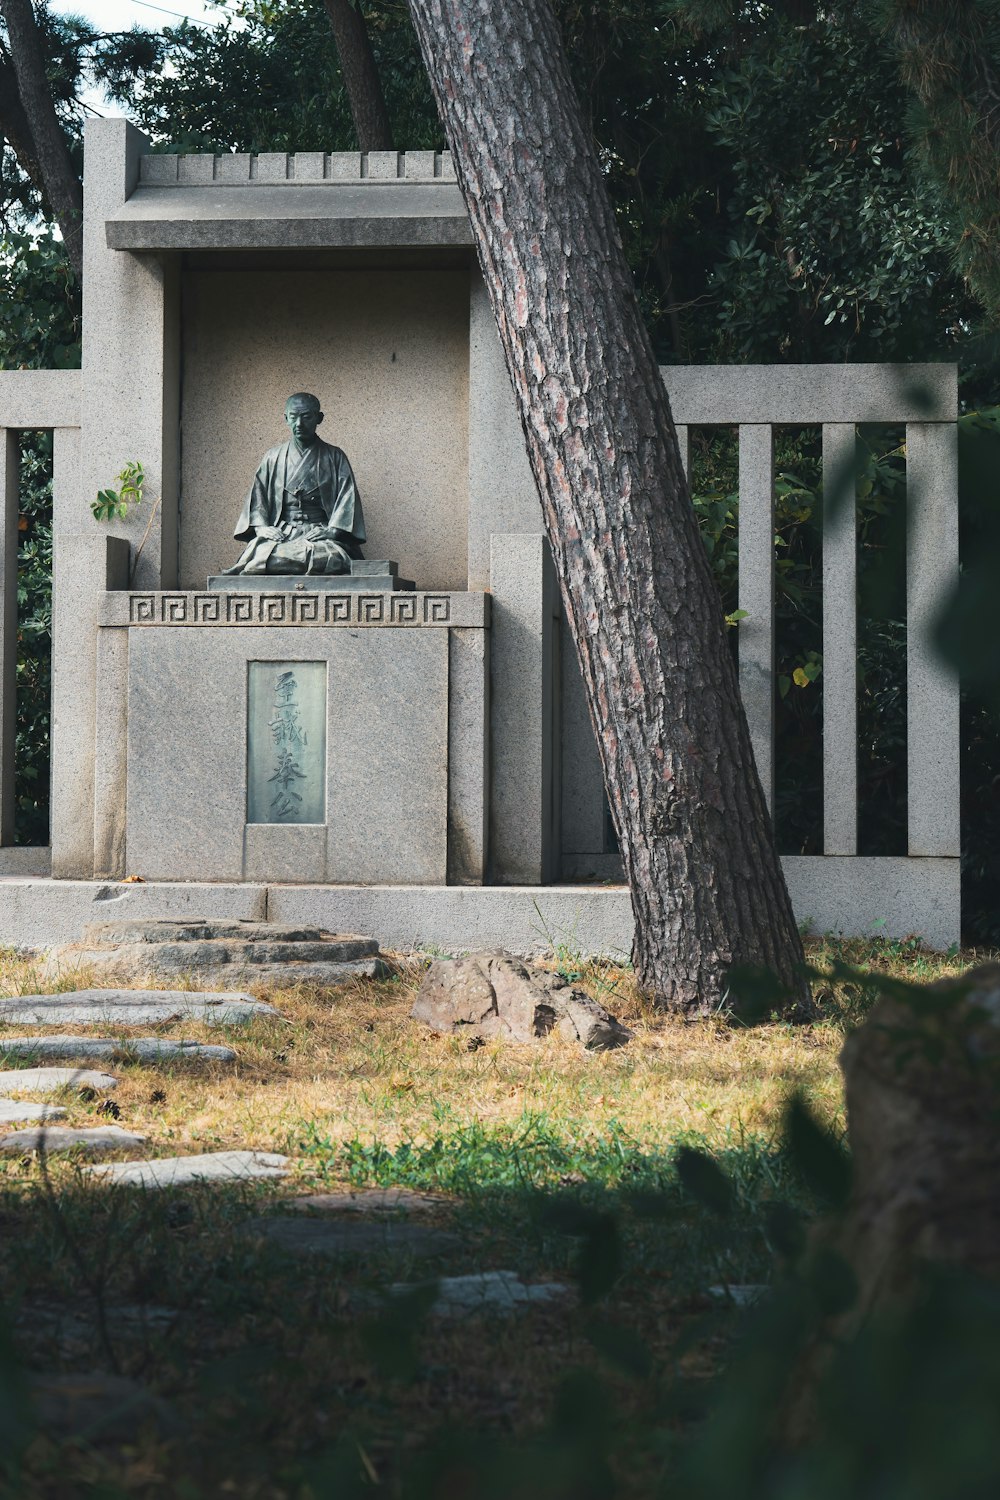 a statue of a man sitting in front of a tree